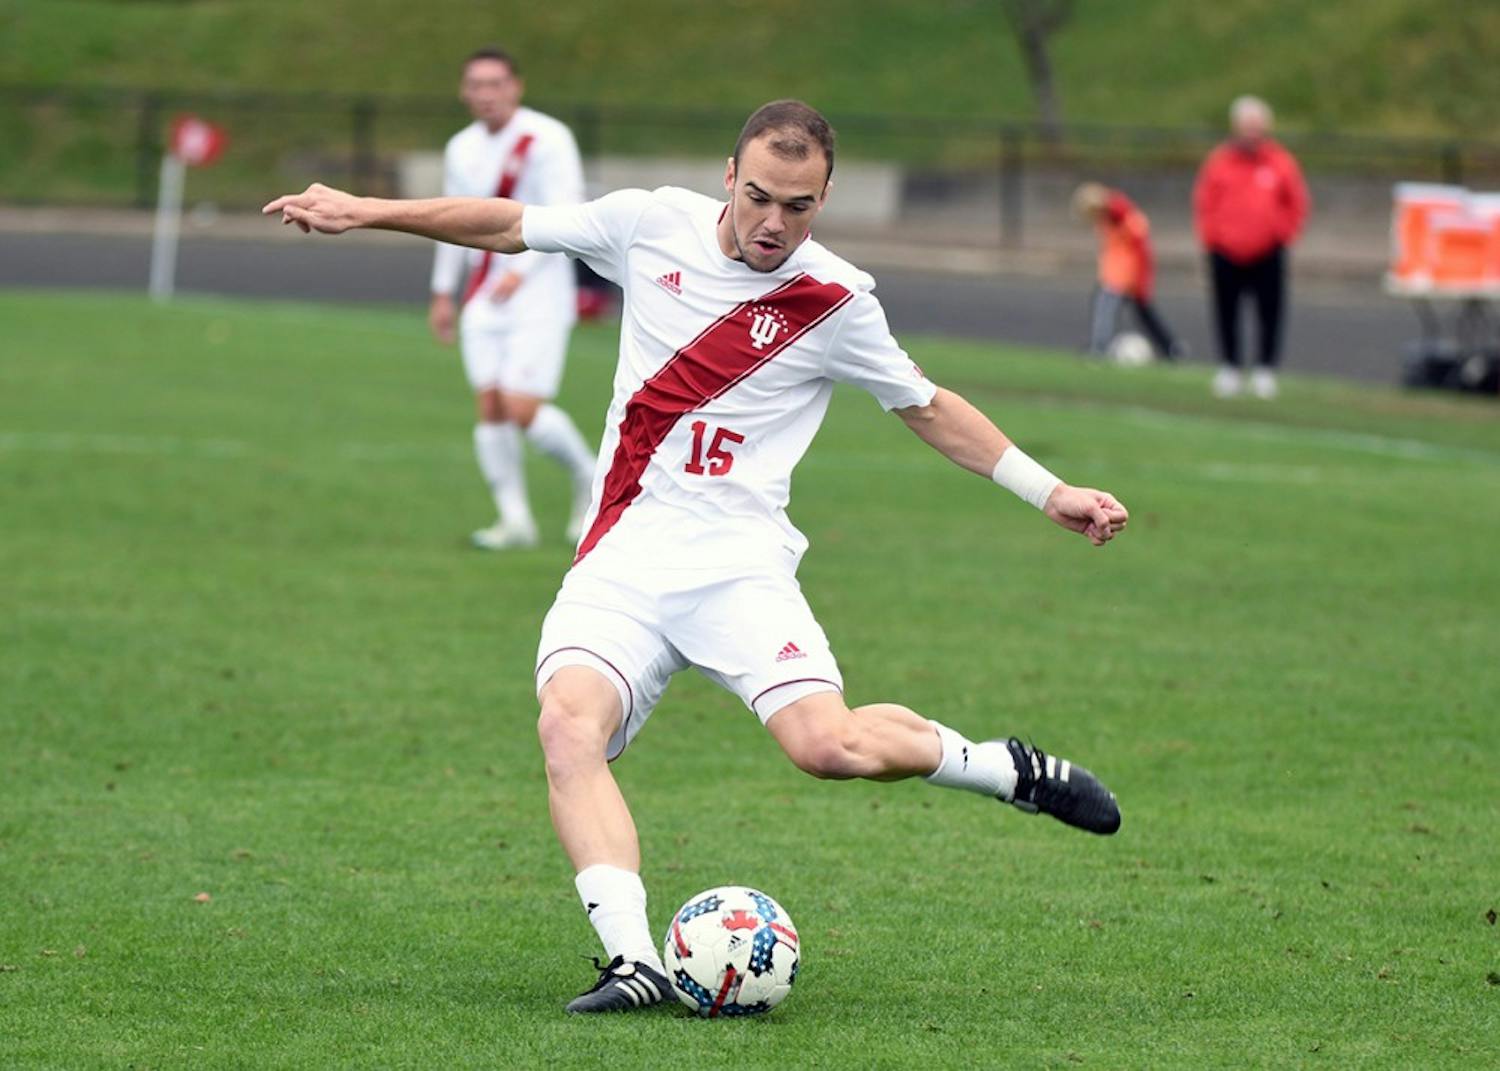 Then-junior defender Andrew Gutman kicks the ball against Ohio State on Oct. 15 at Bill Armstrong Stadium. Gutman was named a preseason First Team All-American on Monday.